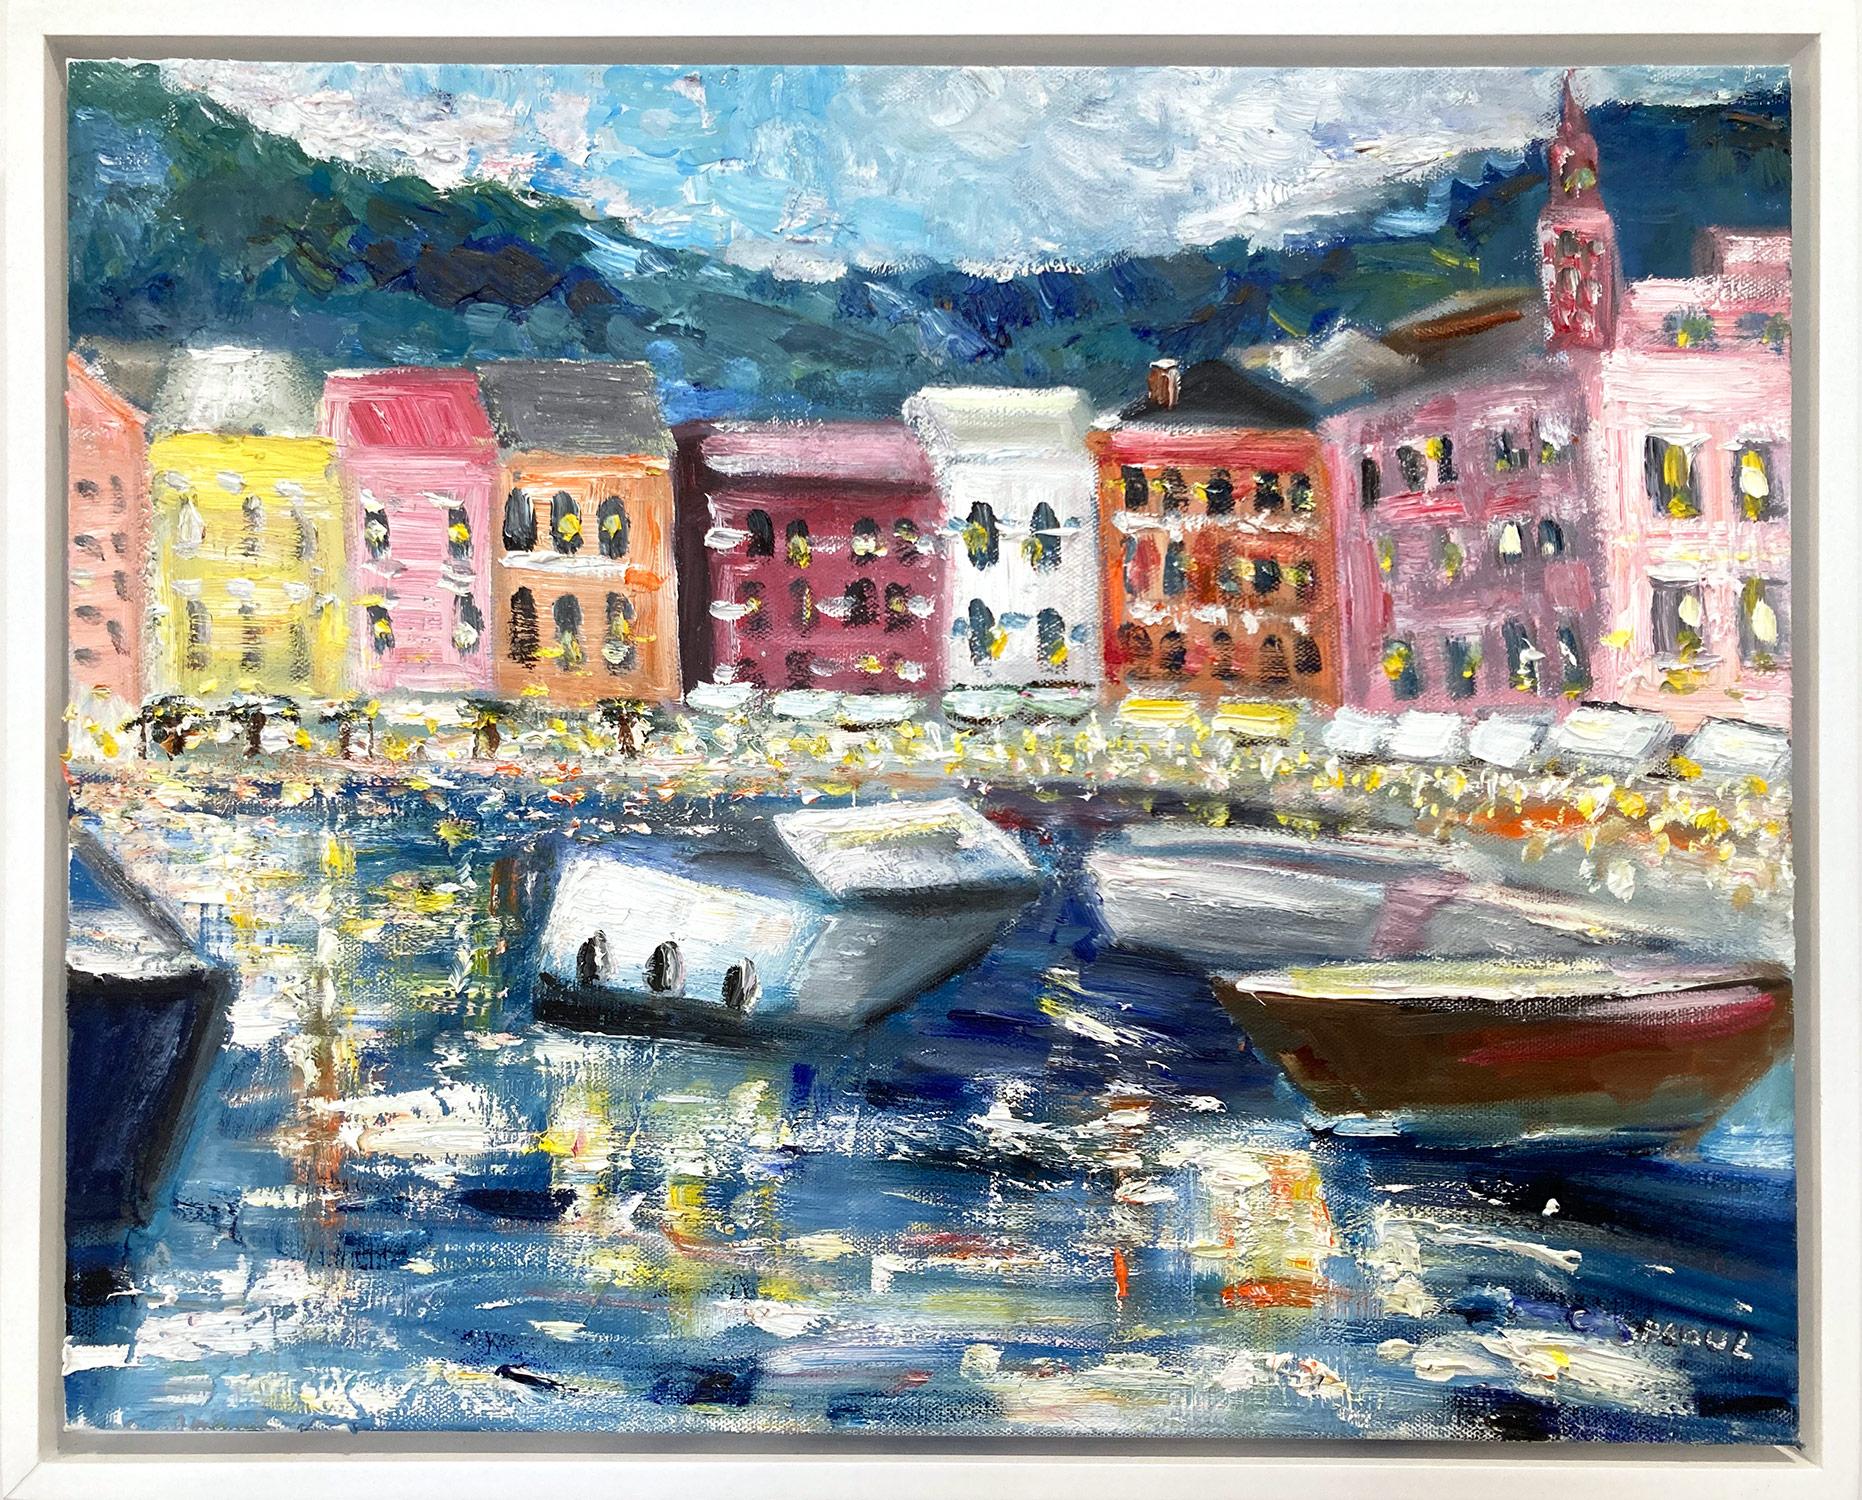 Cindy Shaoul Landscape Painting - "My Sweet Escape" Boats Docked at Portofino Impressionist Oil Painting on Canvas